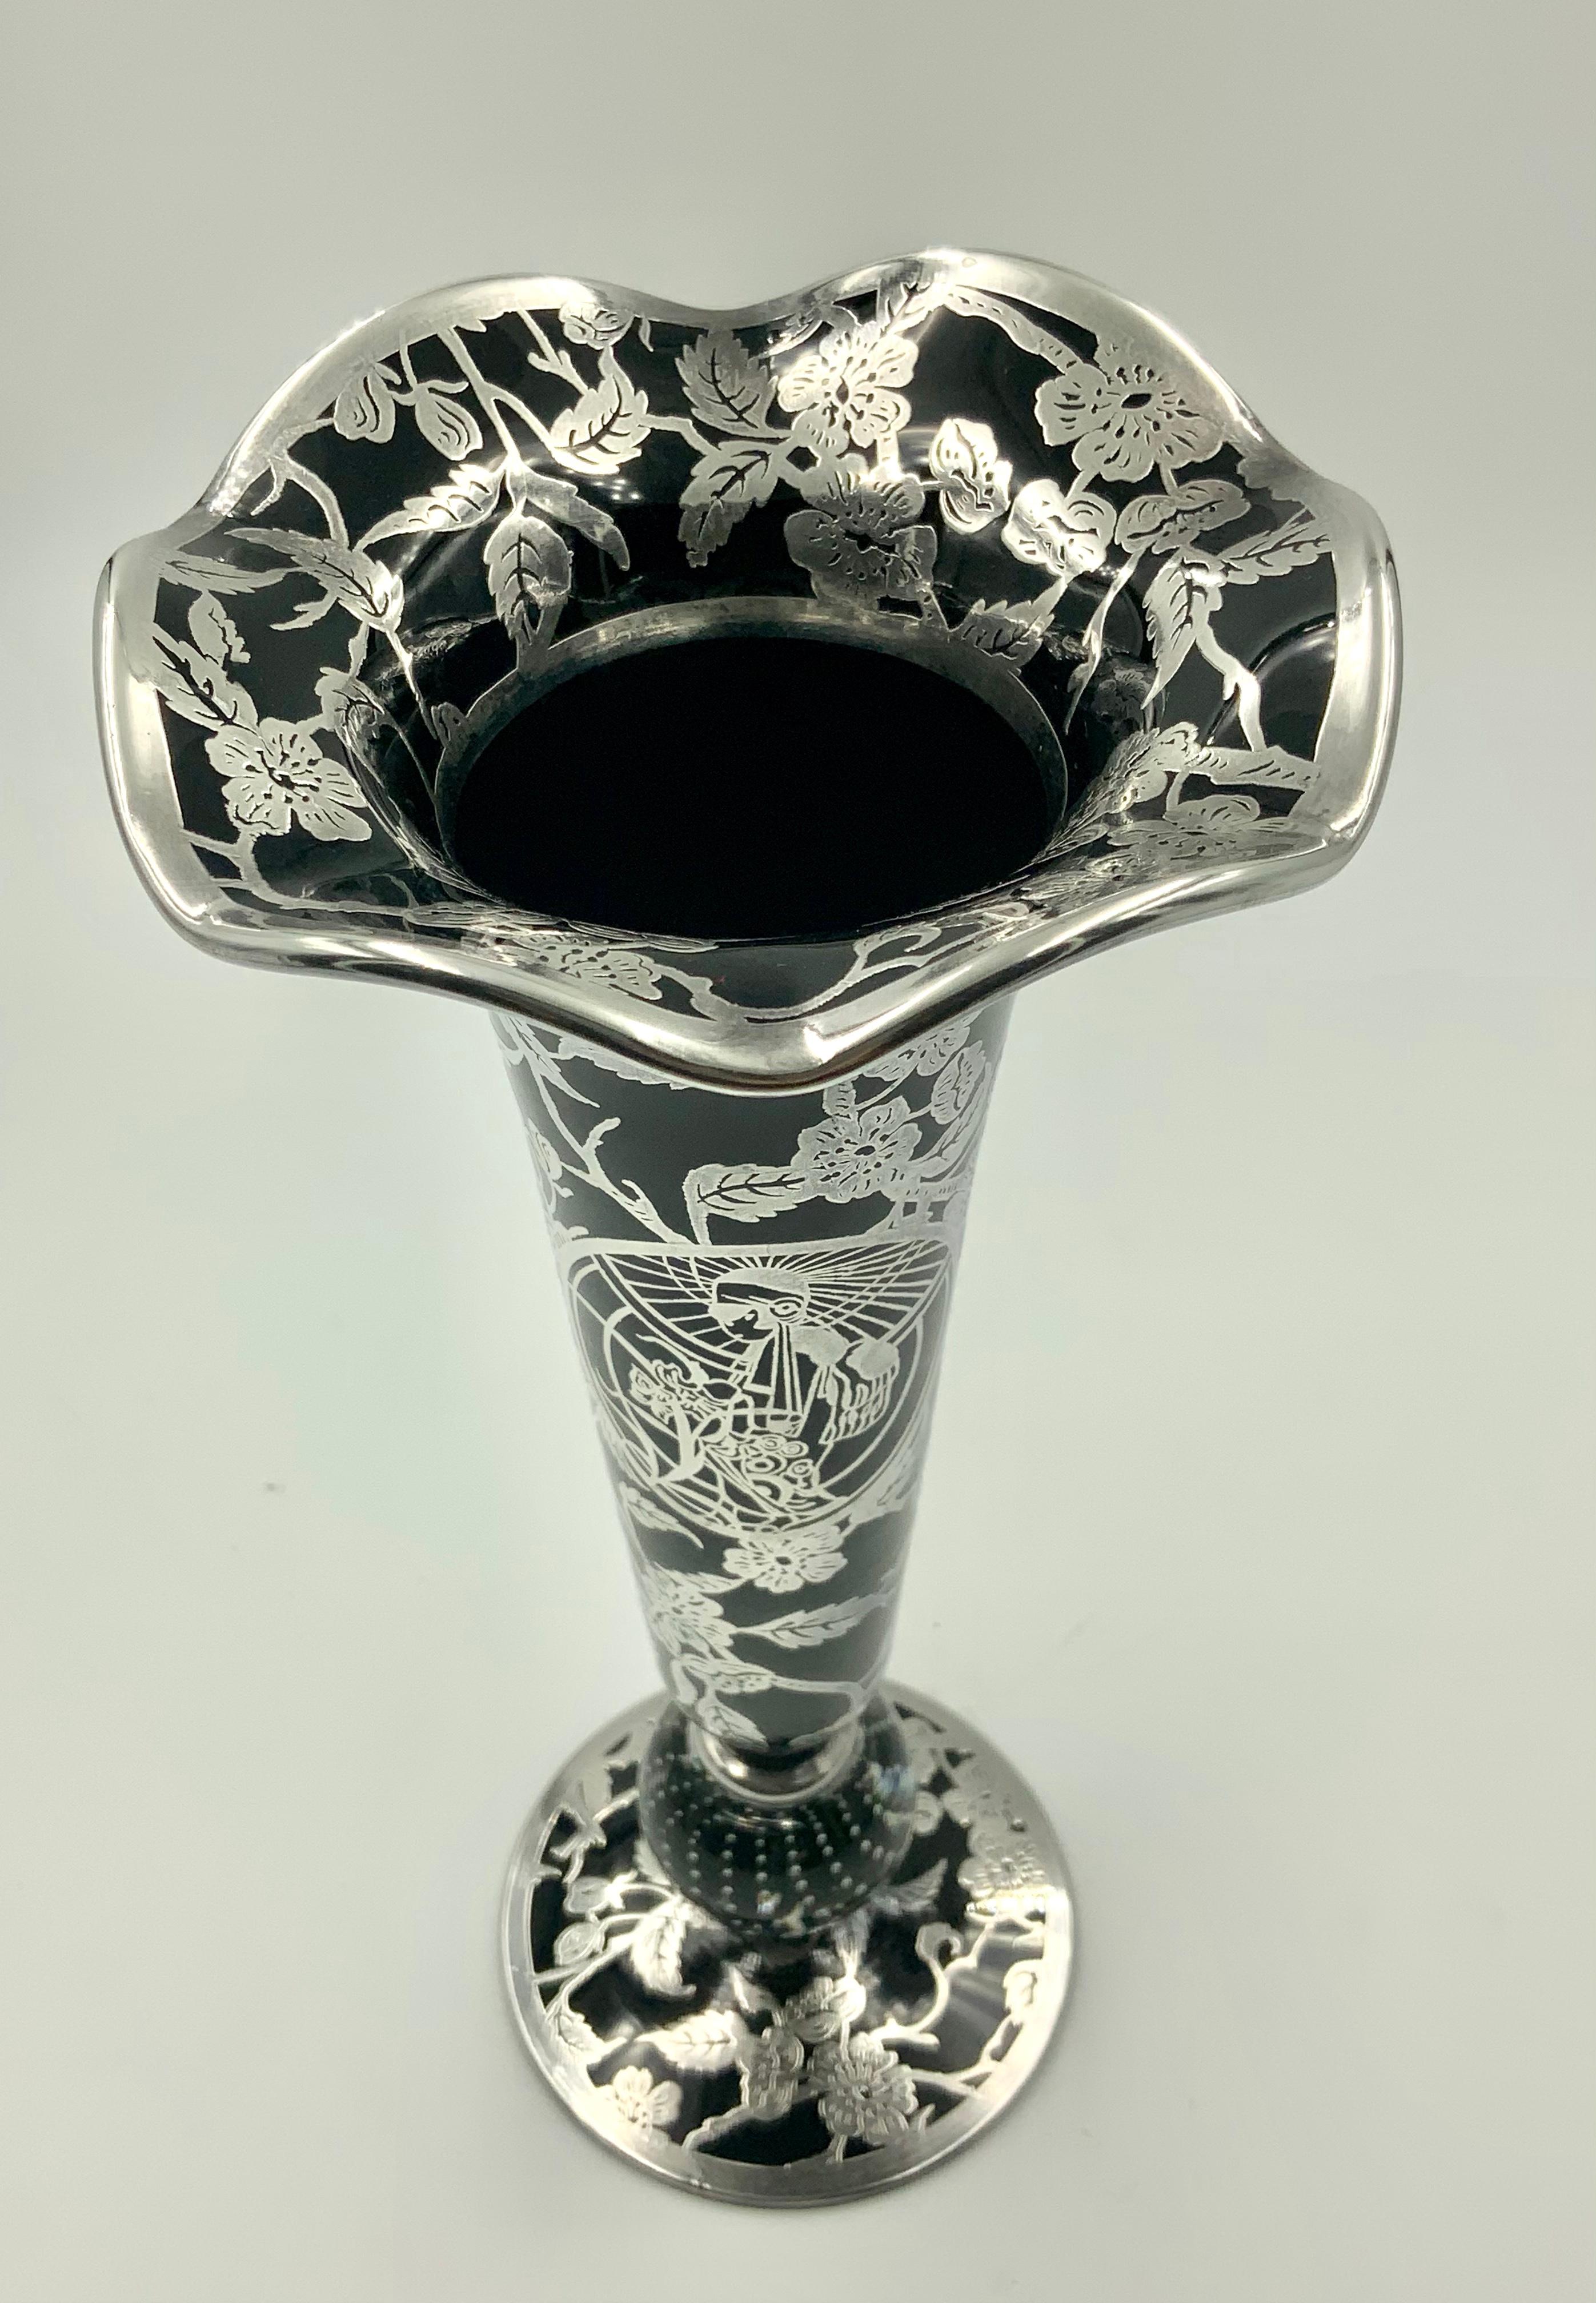 A extraordinary piece created by a collaboration of Rockwell Silver Company and pairpoint glass. This beautiful black amethyst glass vase has the traditional Pairpoint bubble glass base and a gorgeous ruffled trumpet. To make the piece even more